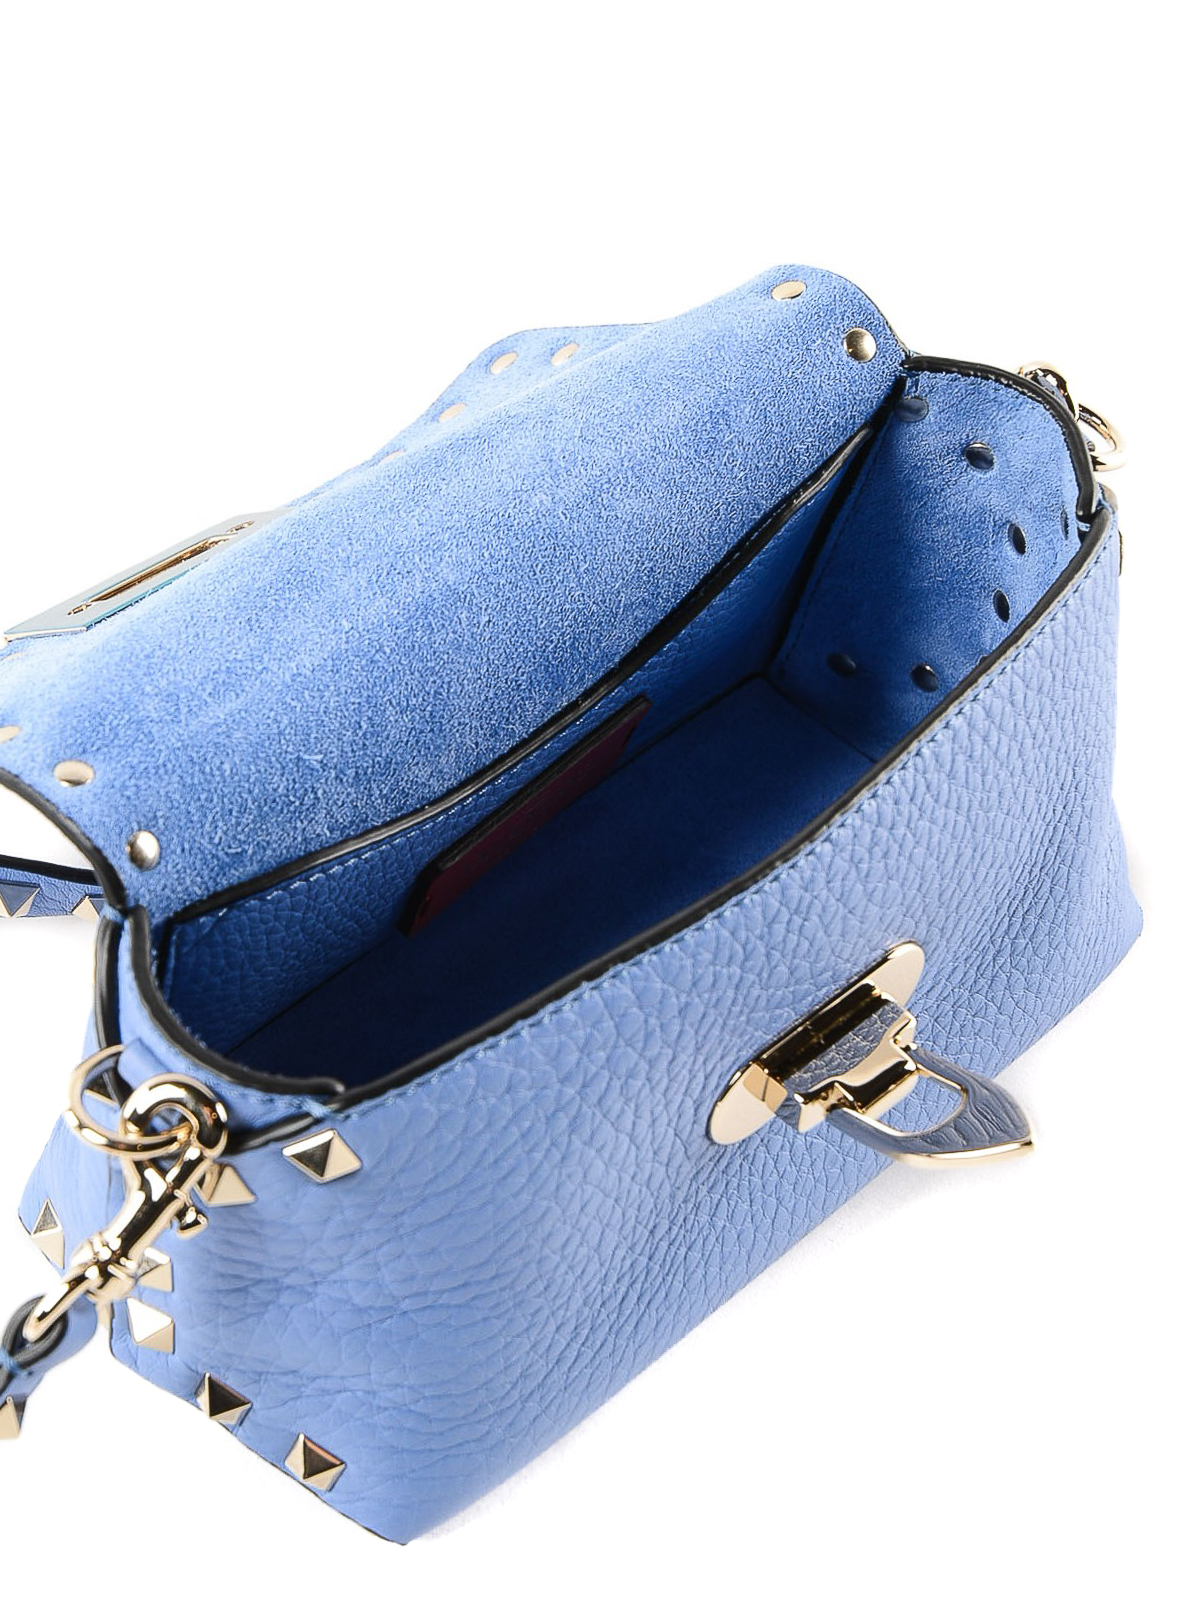 Love a crossbody and especially this @valentino Rockstud with its ligh